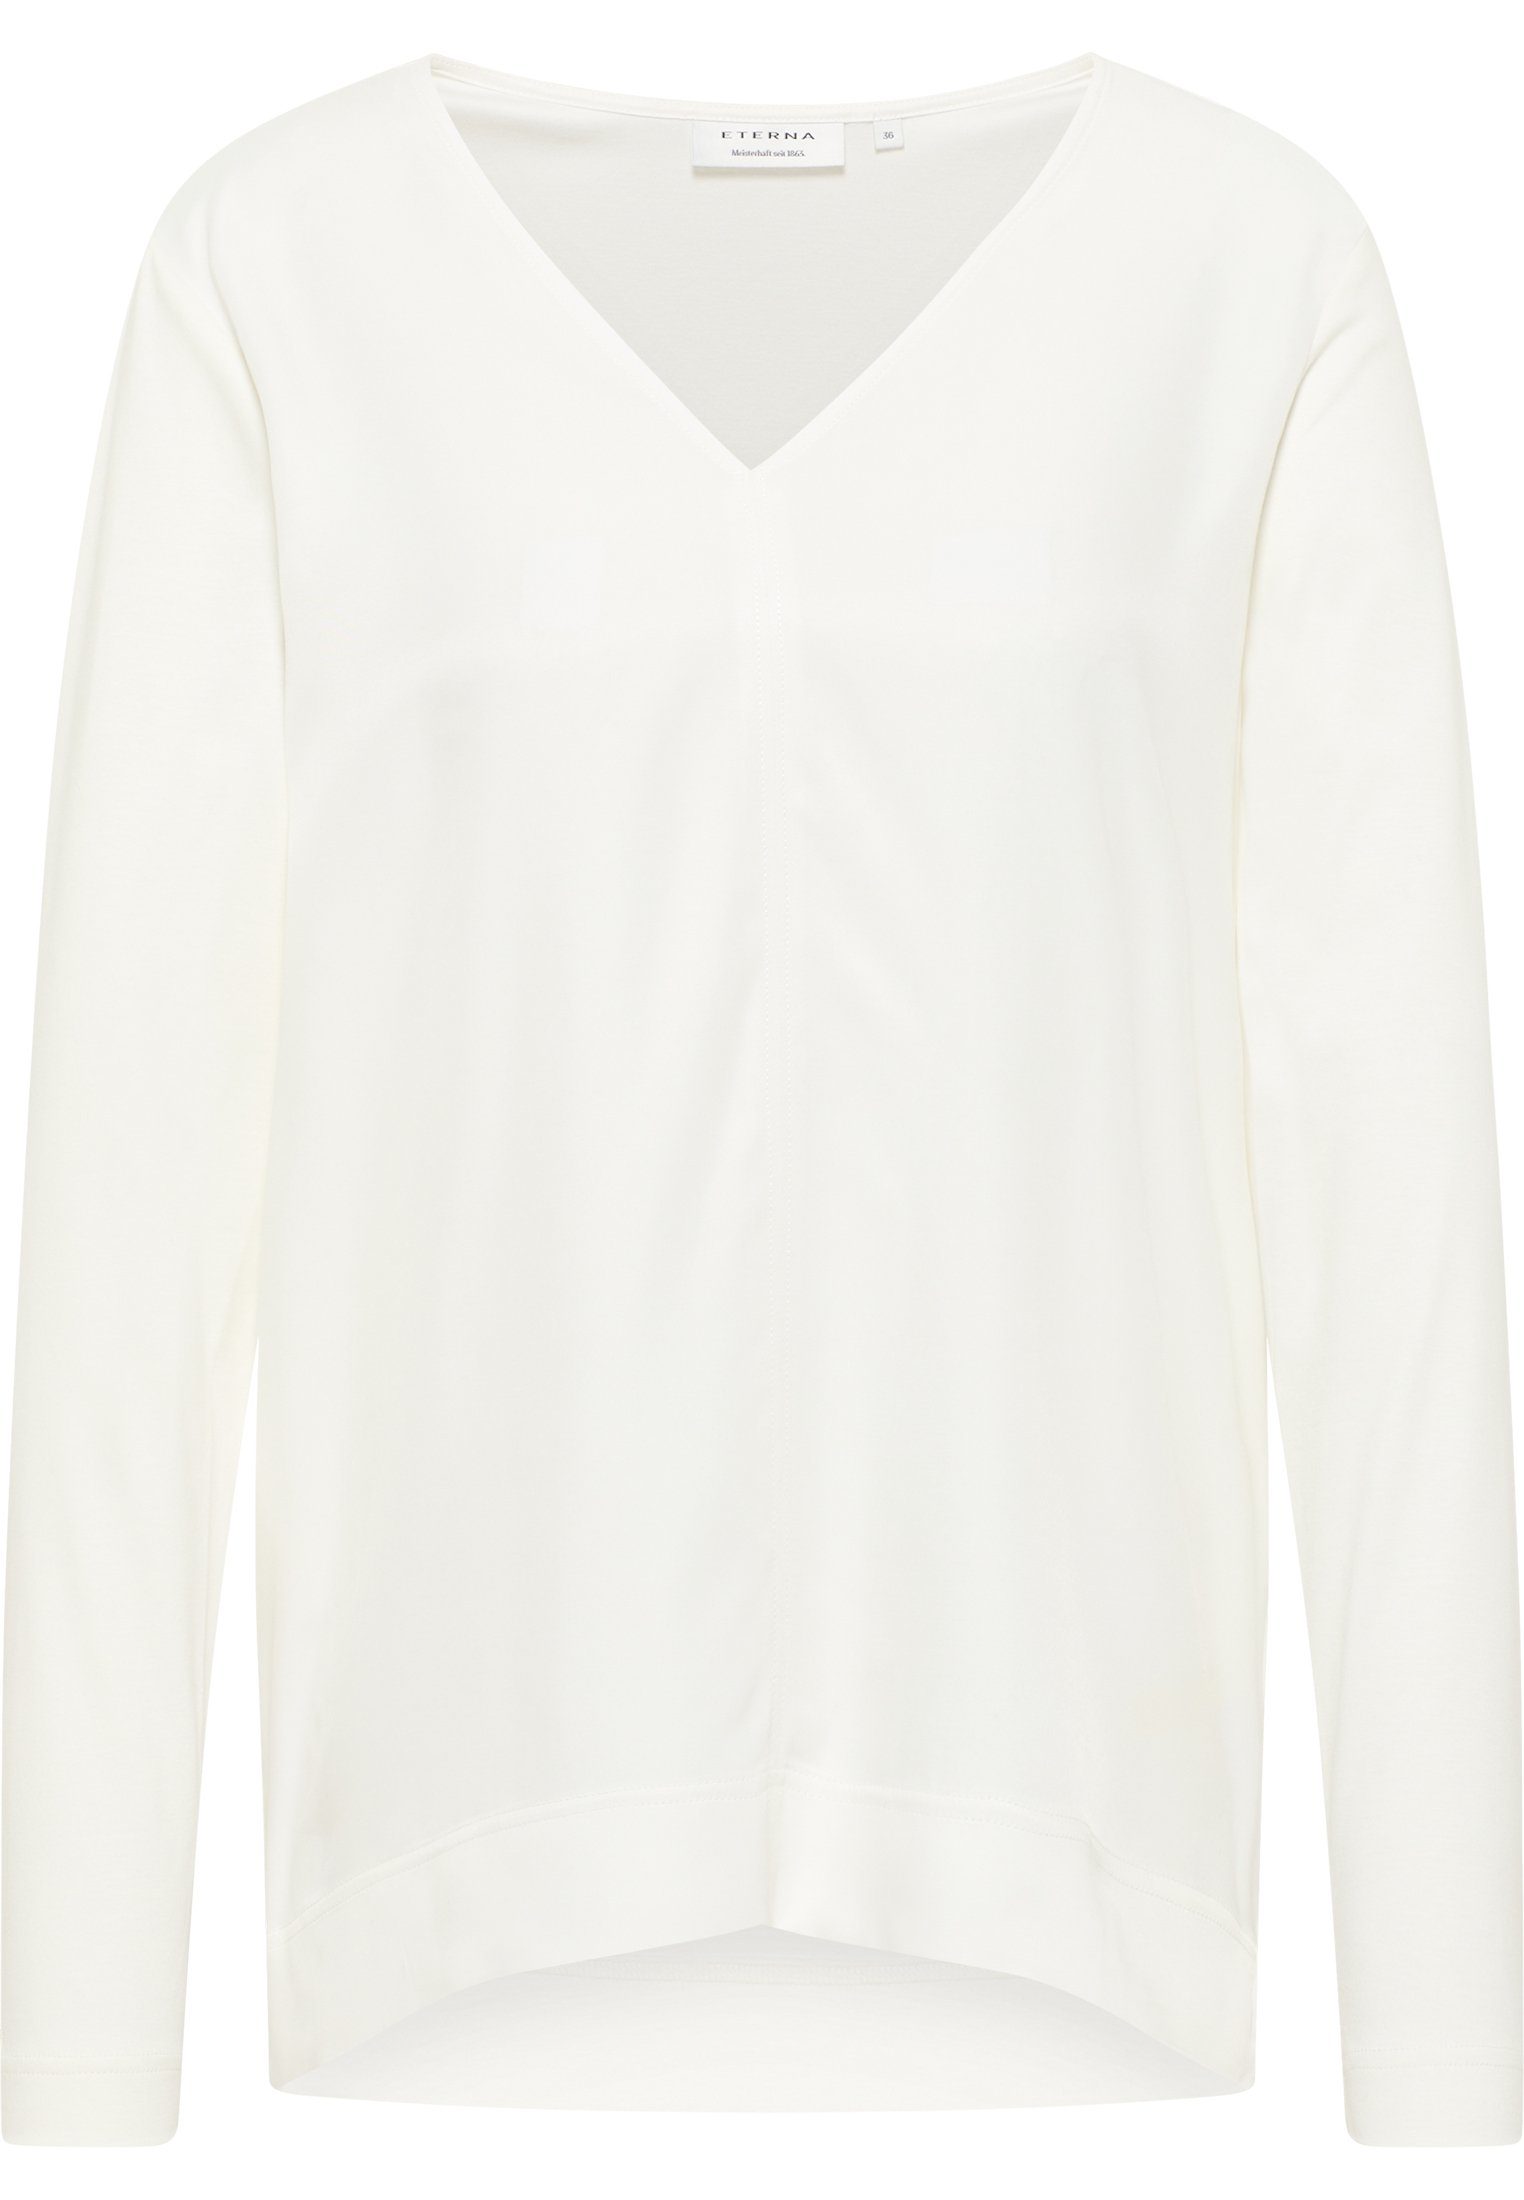 Eterna Shirtbluse LOOSE off-white FIT